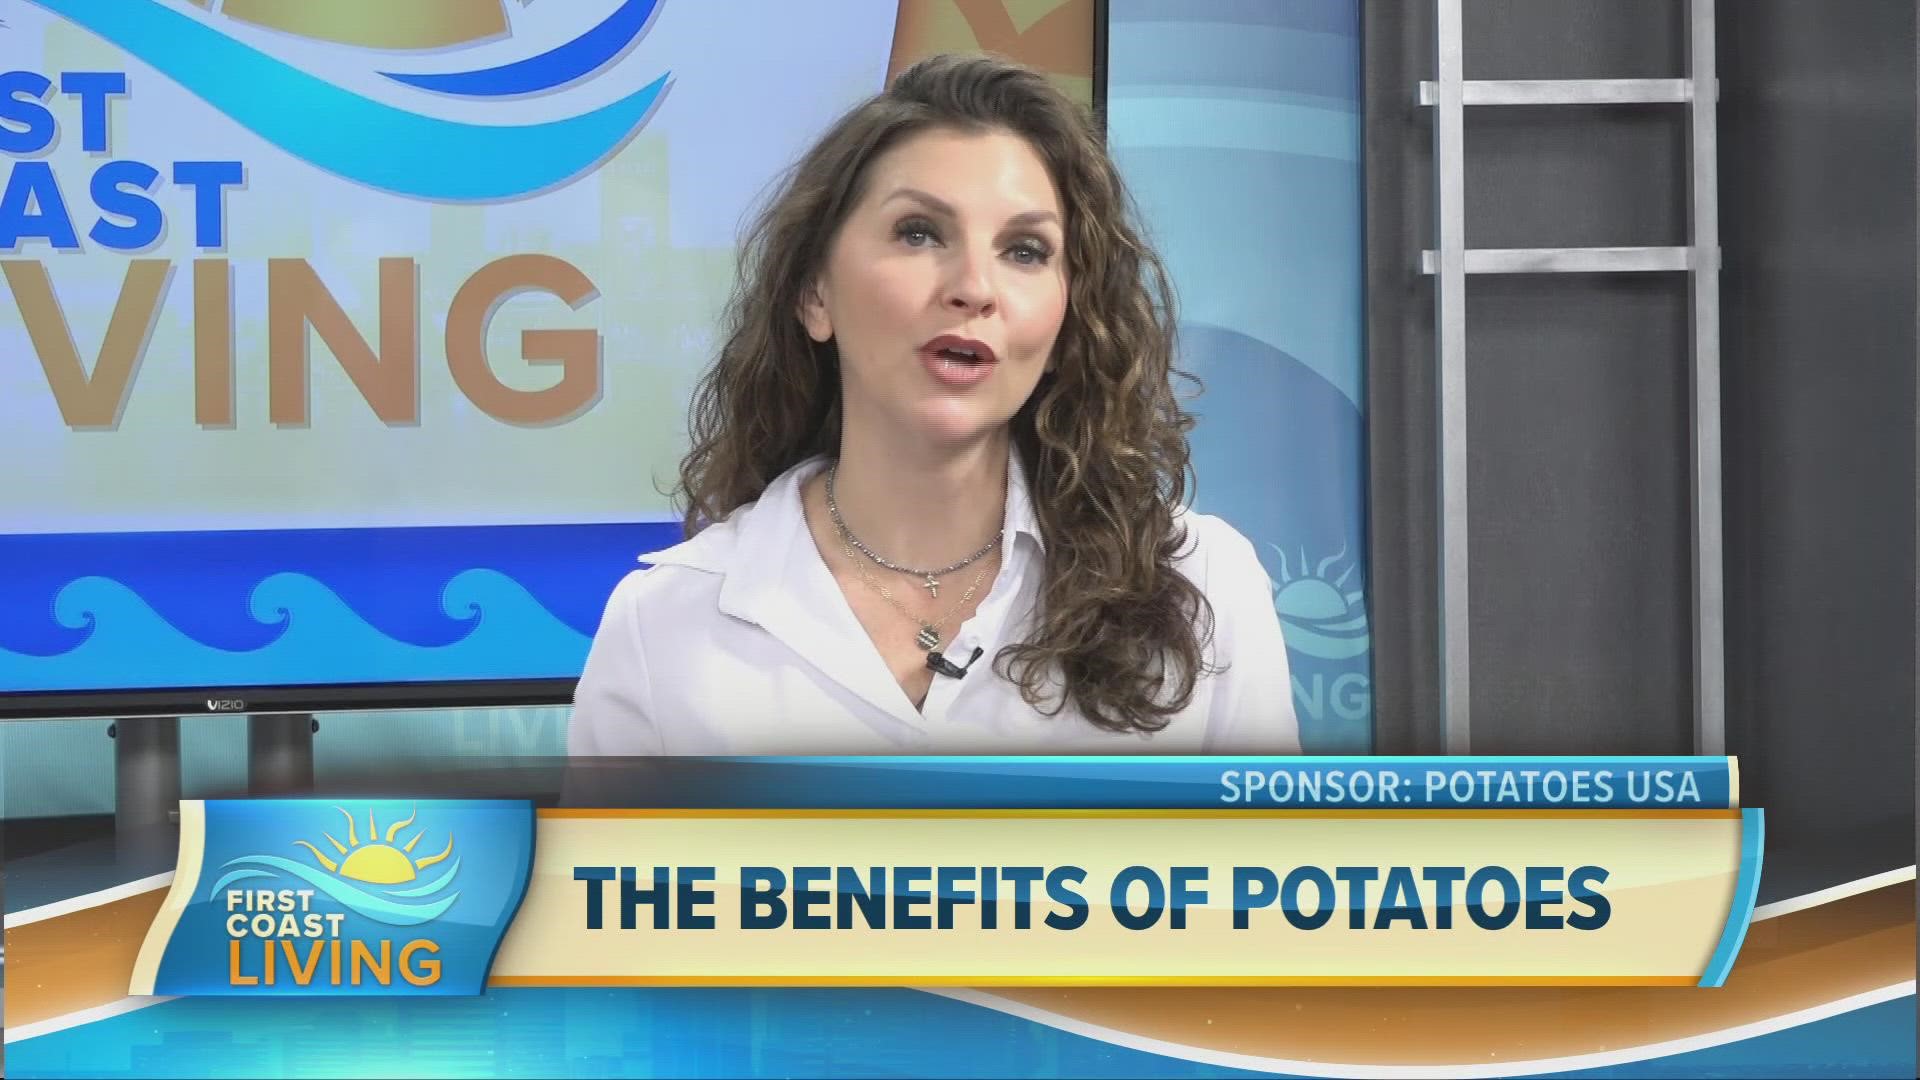 Many of us are trying to eat better, save money, and find more time in our day. There’s kitchen hero that’s a solution for it all: the potato!